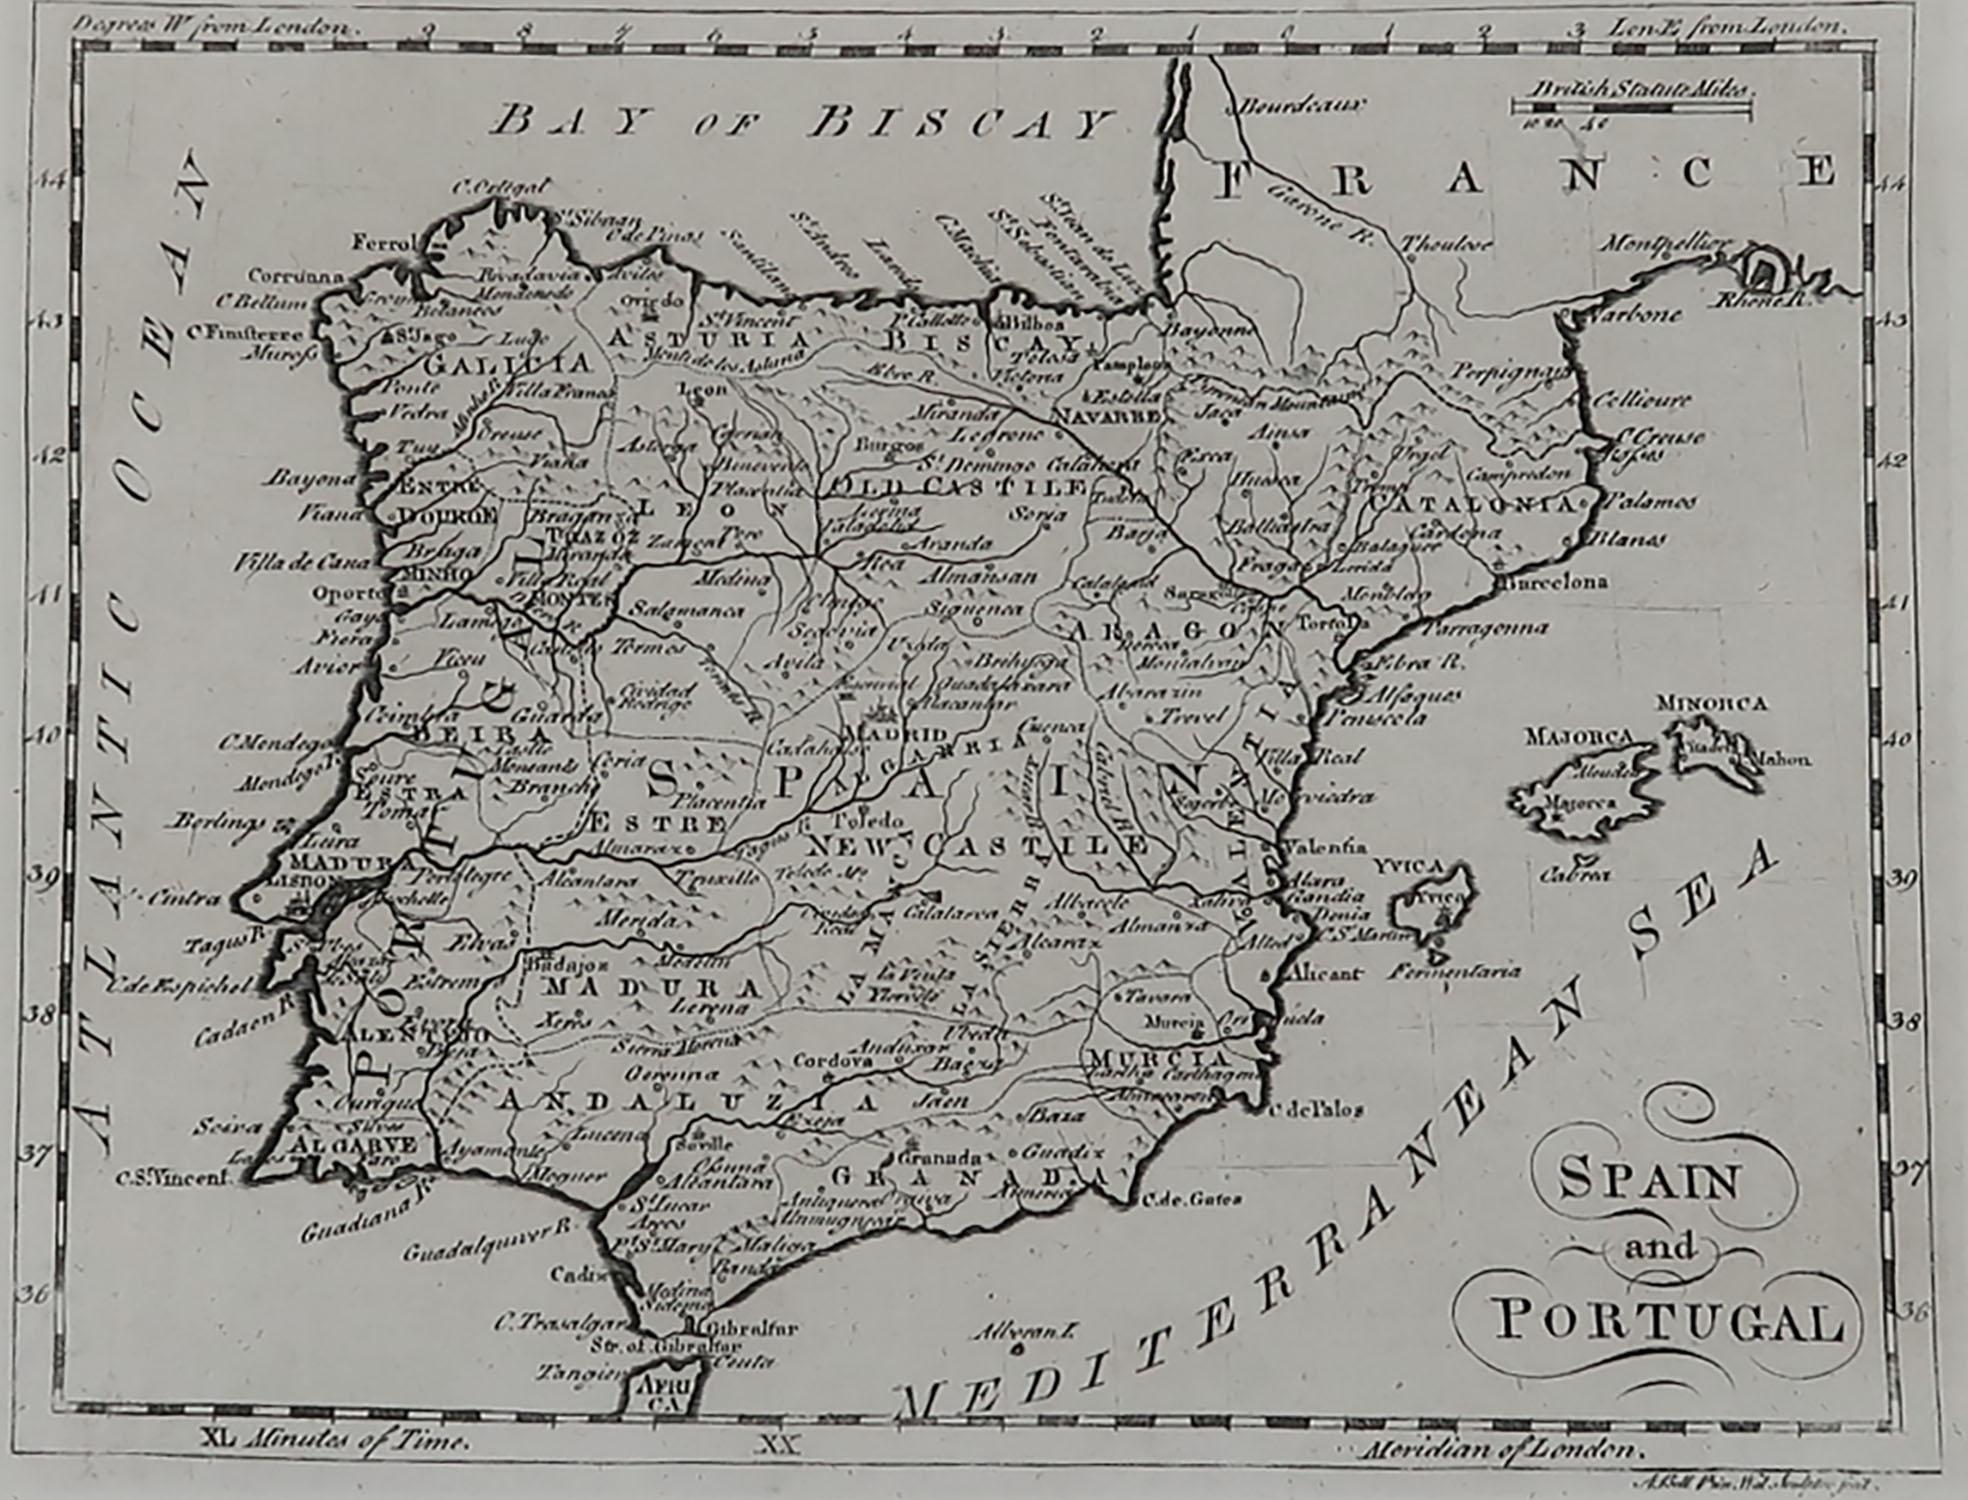 Other Original Antique Map of Spain and Portugal, circa 1790